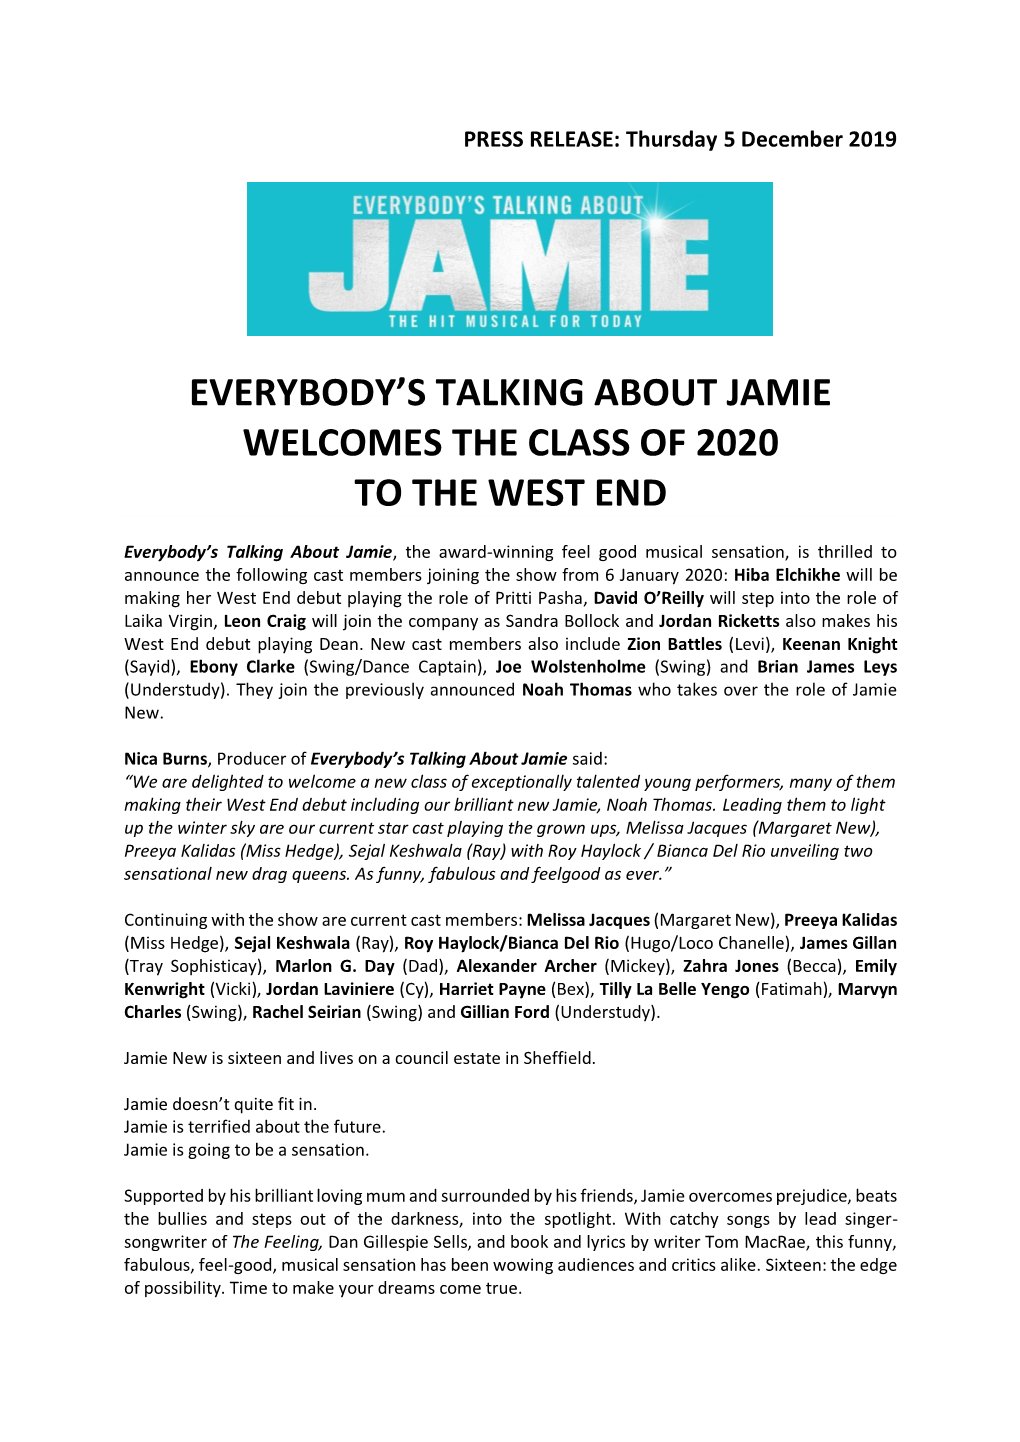 Everybody's Talking About Jamie Welcomes the Class of 2020 to The